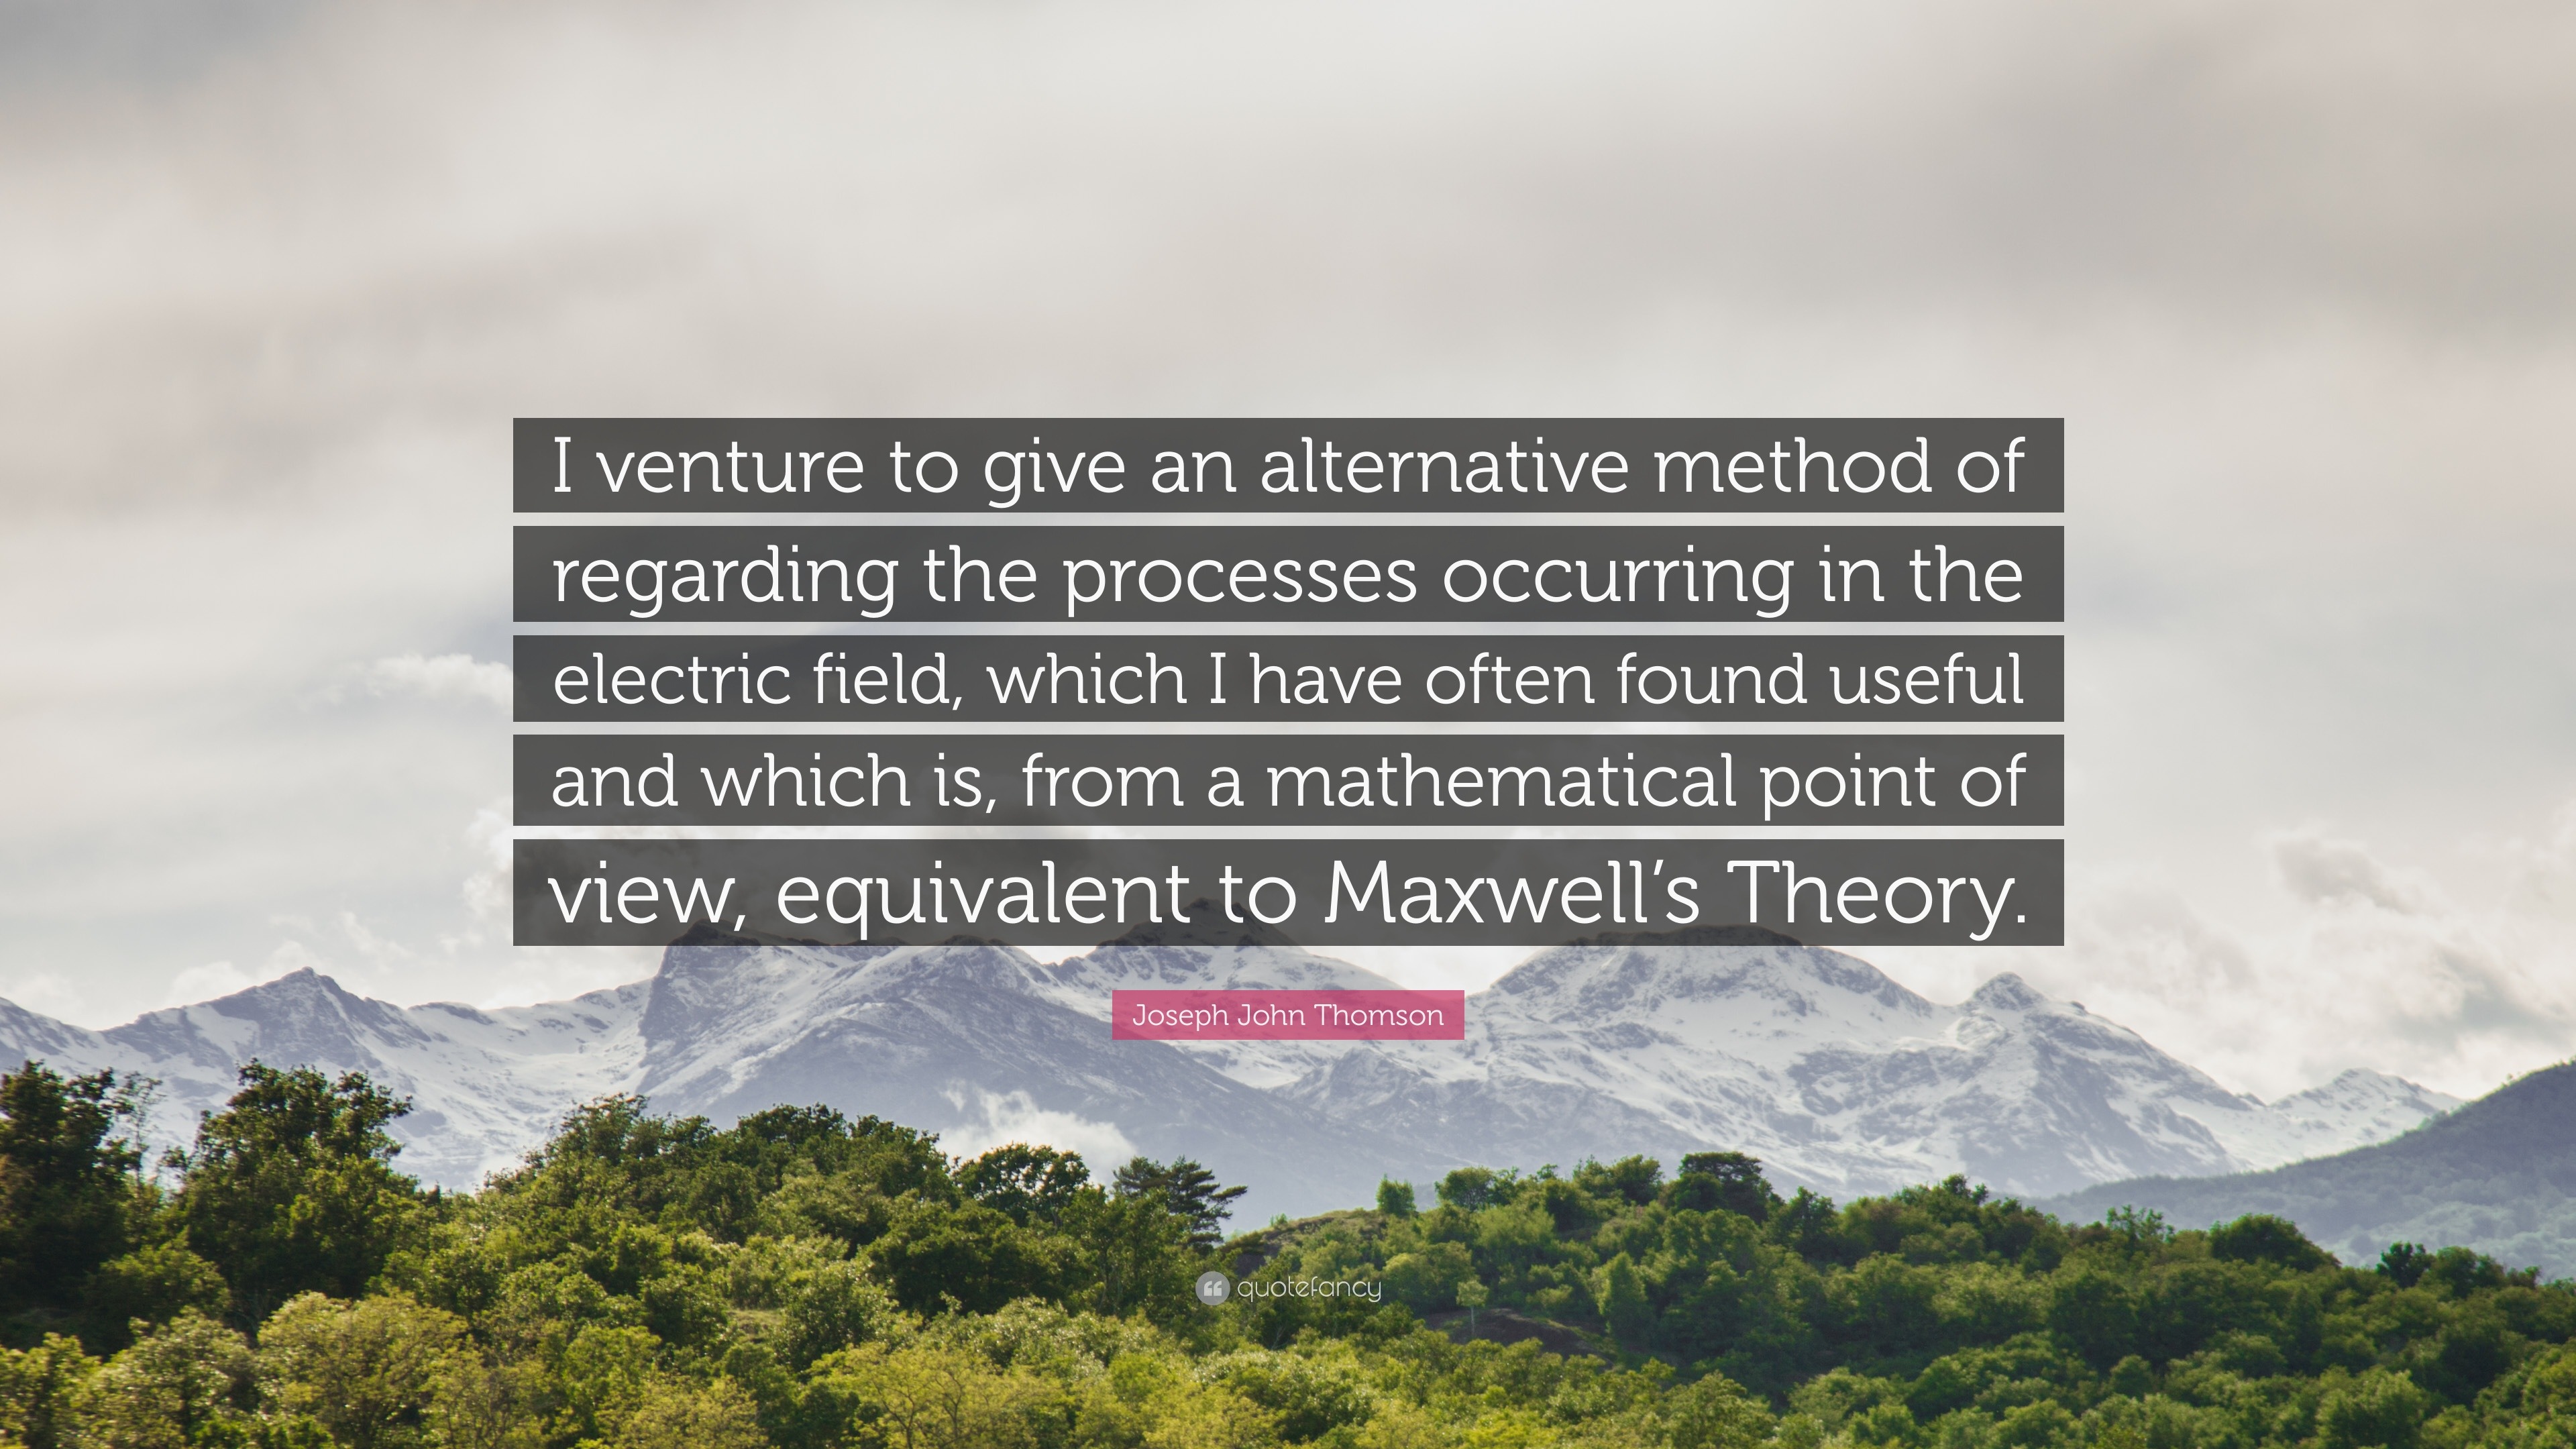 Joseph John Thomson Quote I Venture To Give An Alternative Method Of Regarding The Processes Occurring In The Electric Field Which I Have Often F